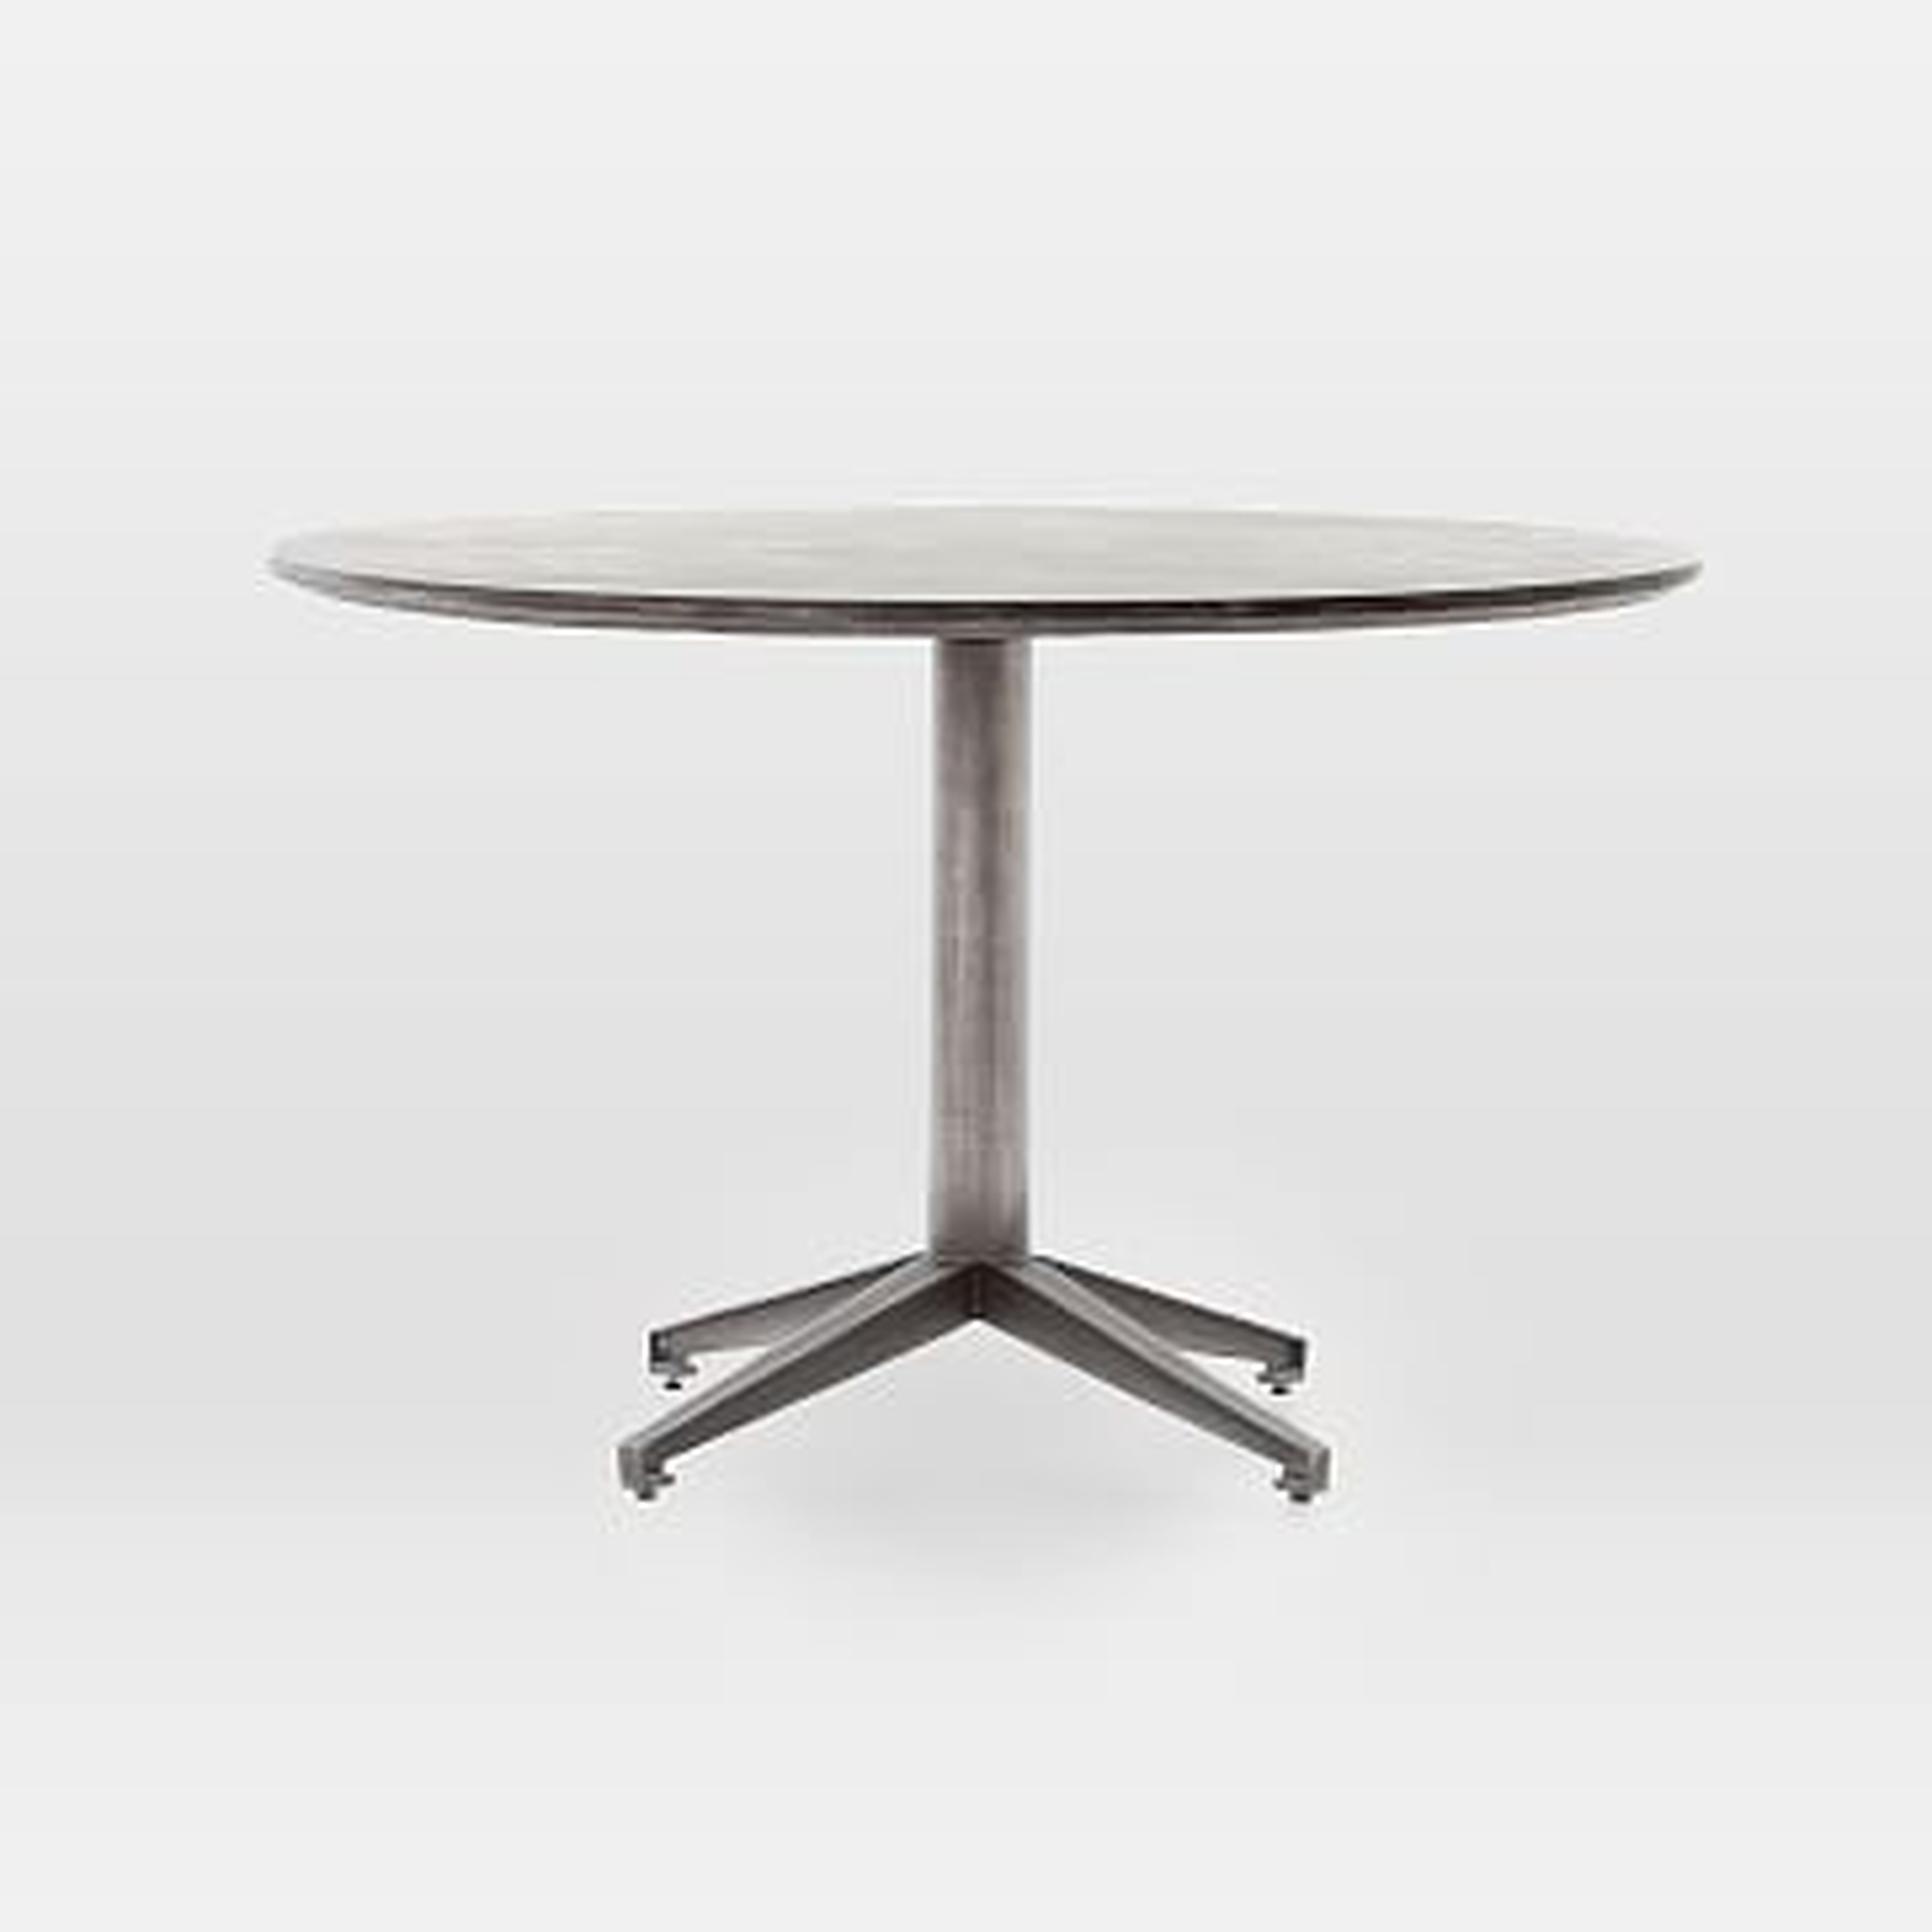 Concrete-Topped Round Dining Table - West Elm